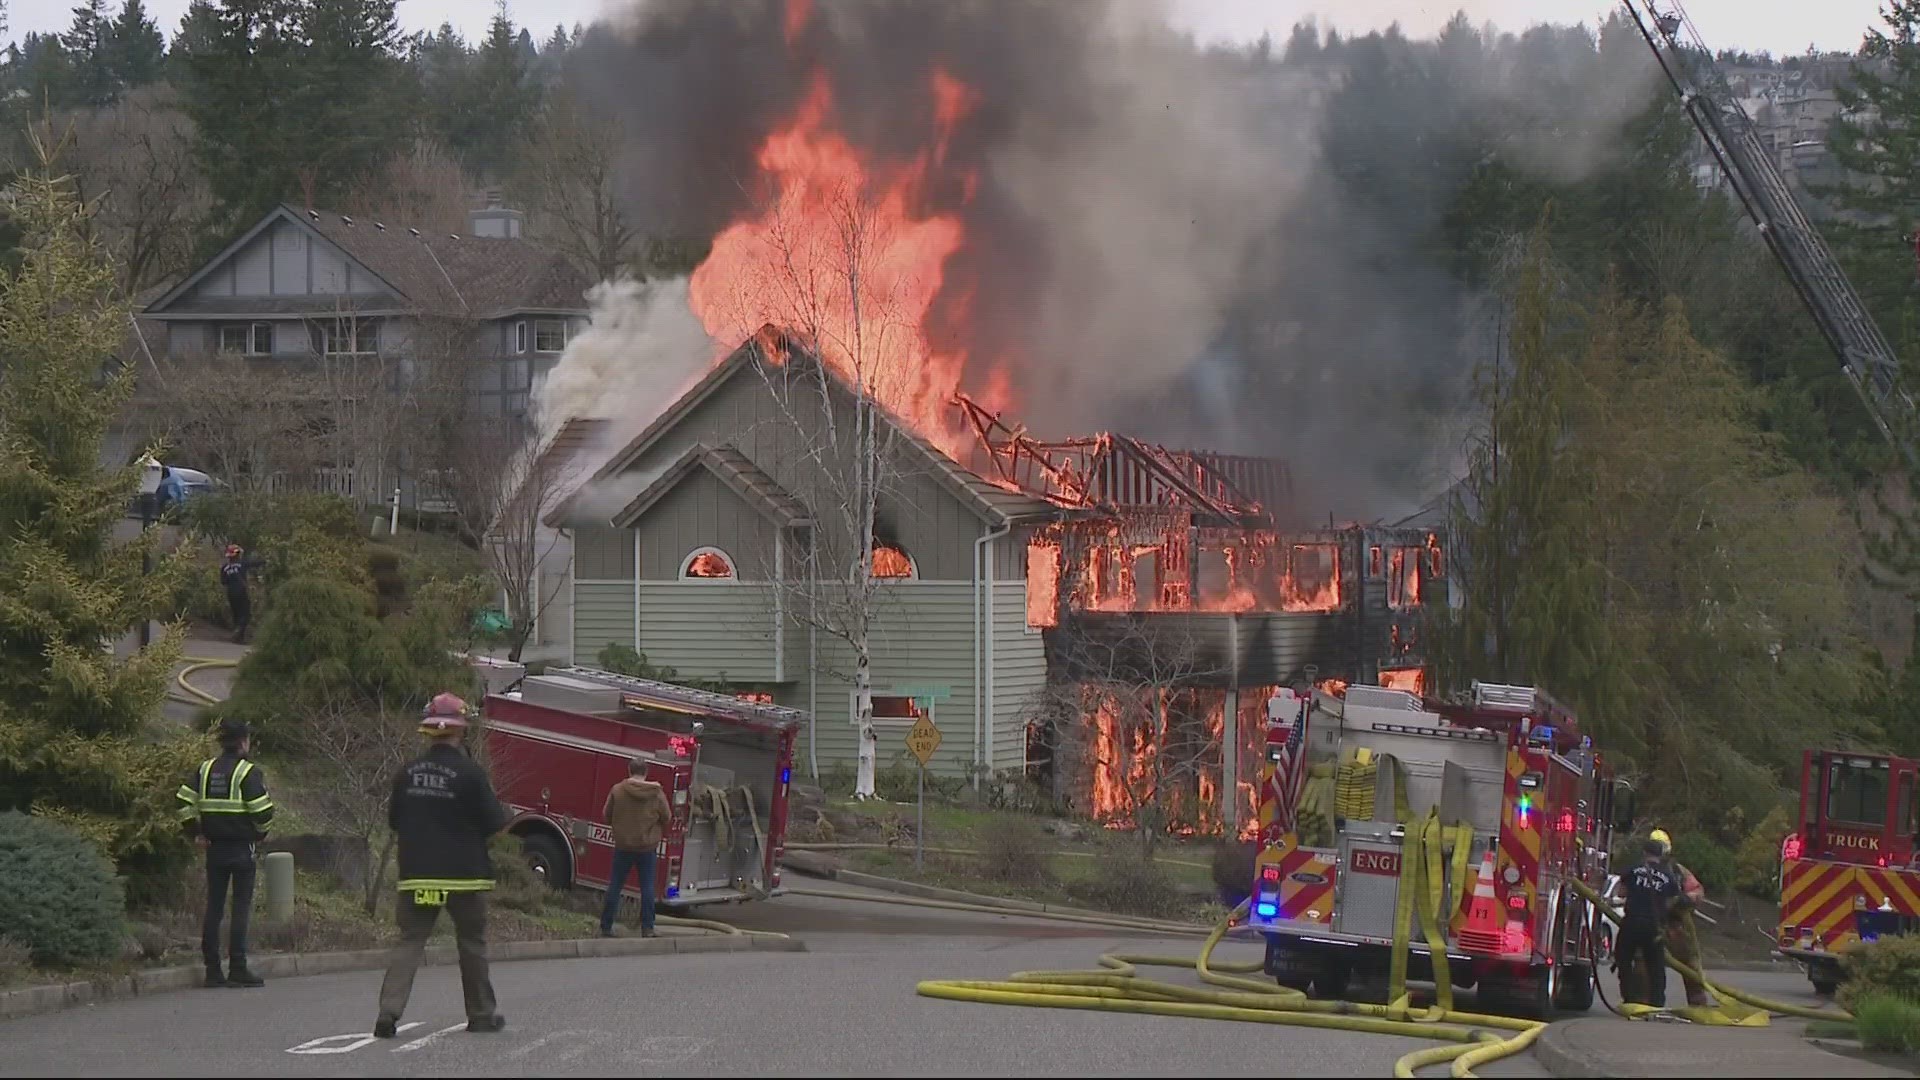 Portland Fire said they were responding to two homes on fire in the Northwest Heights neighborhood. Smoke and large flames could be seen coming from one home.